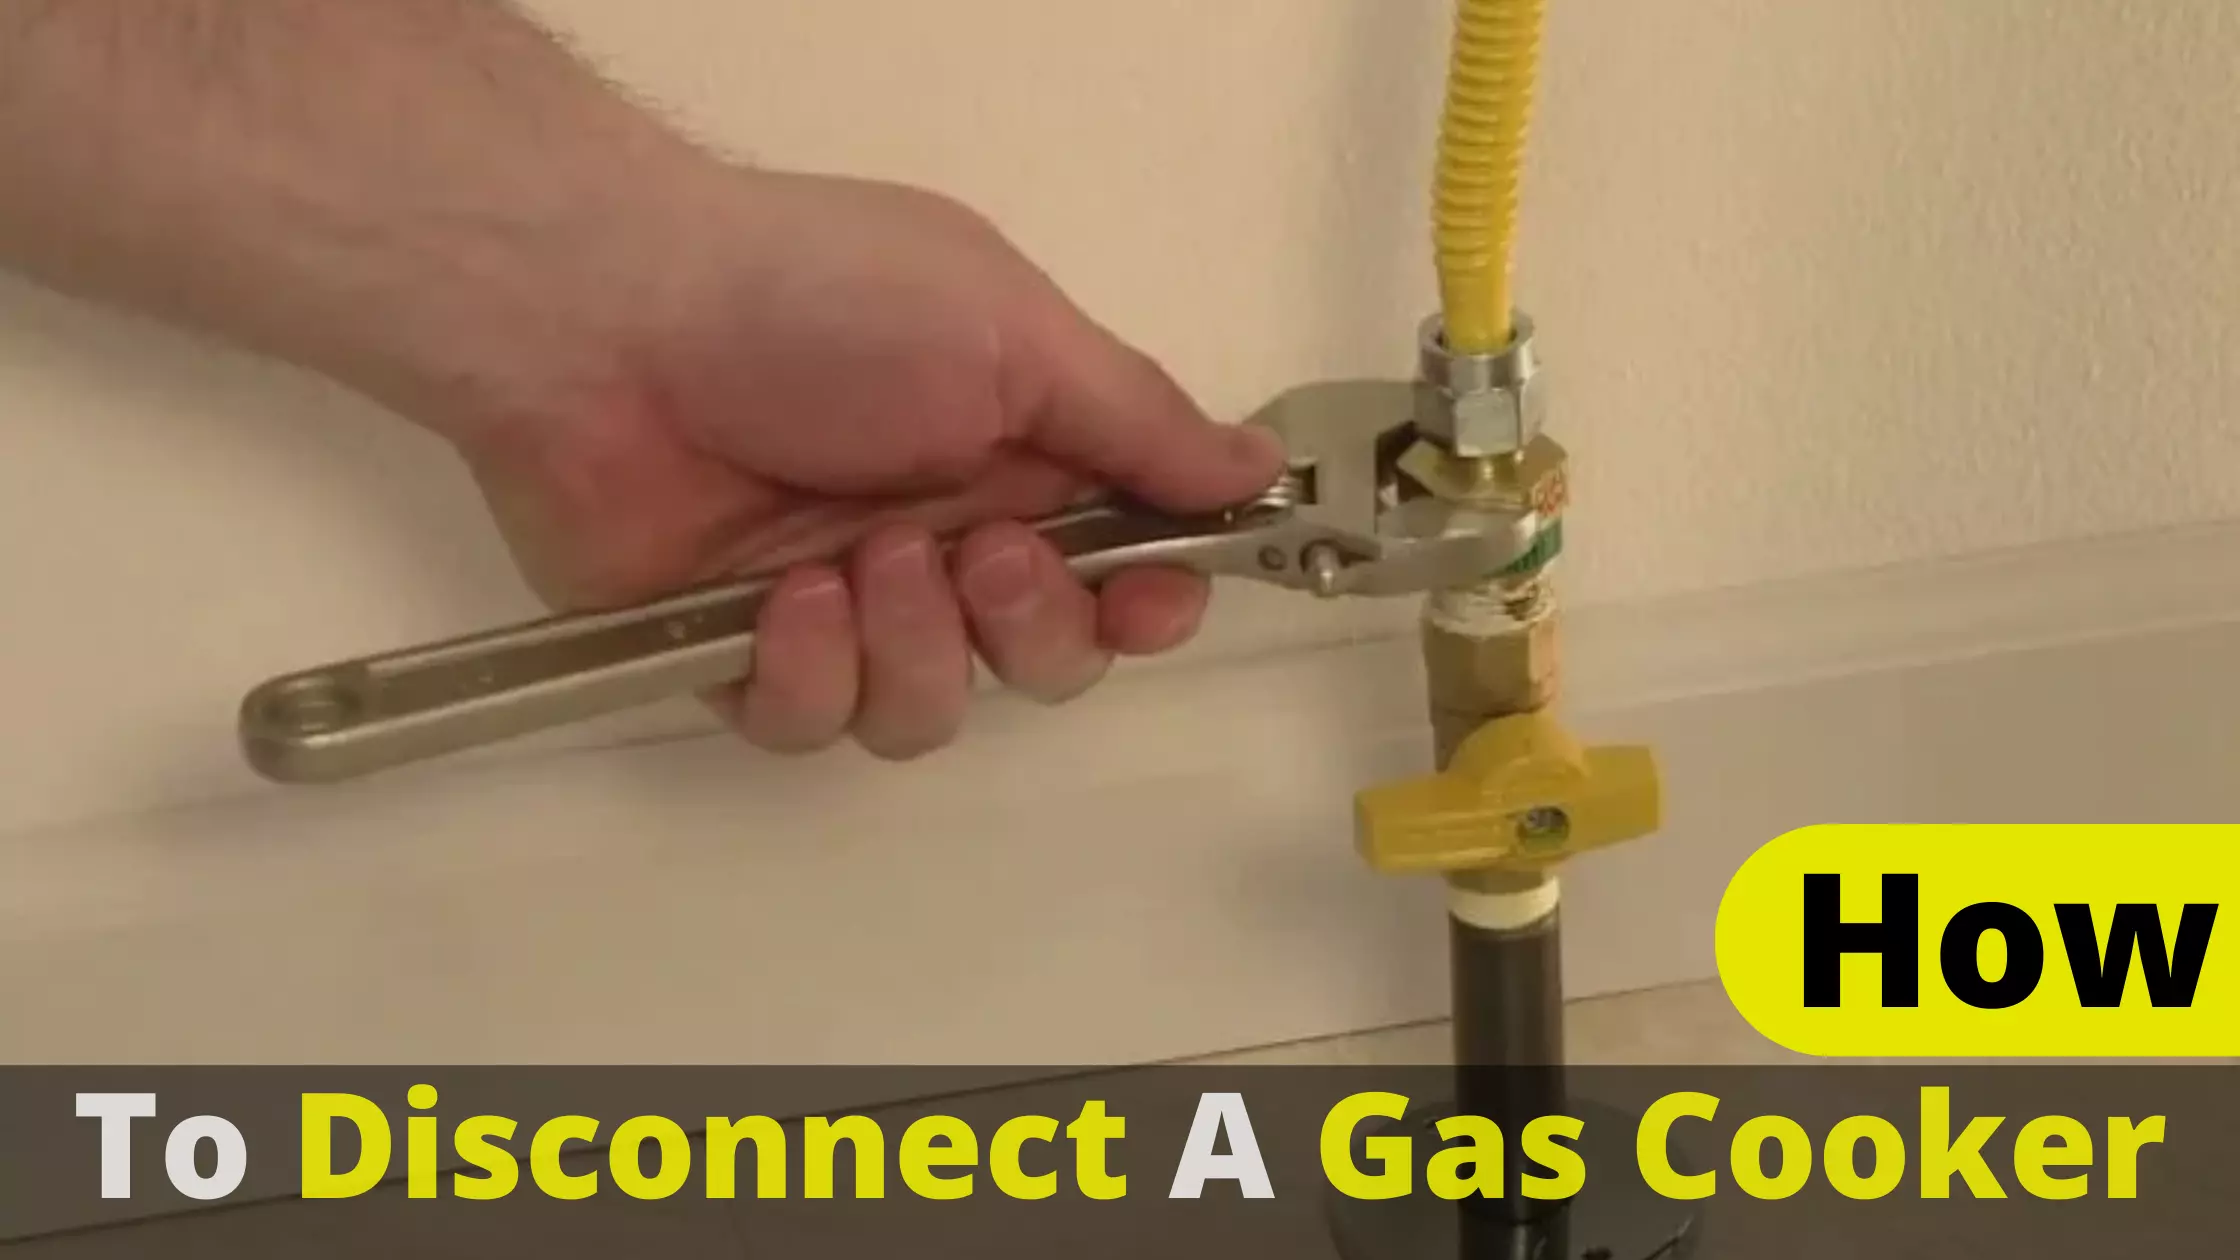 How to disconnect a gas cooker